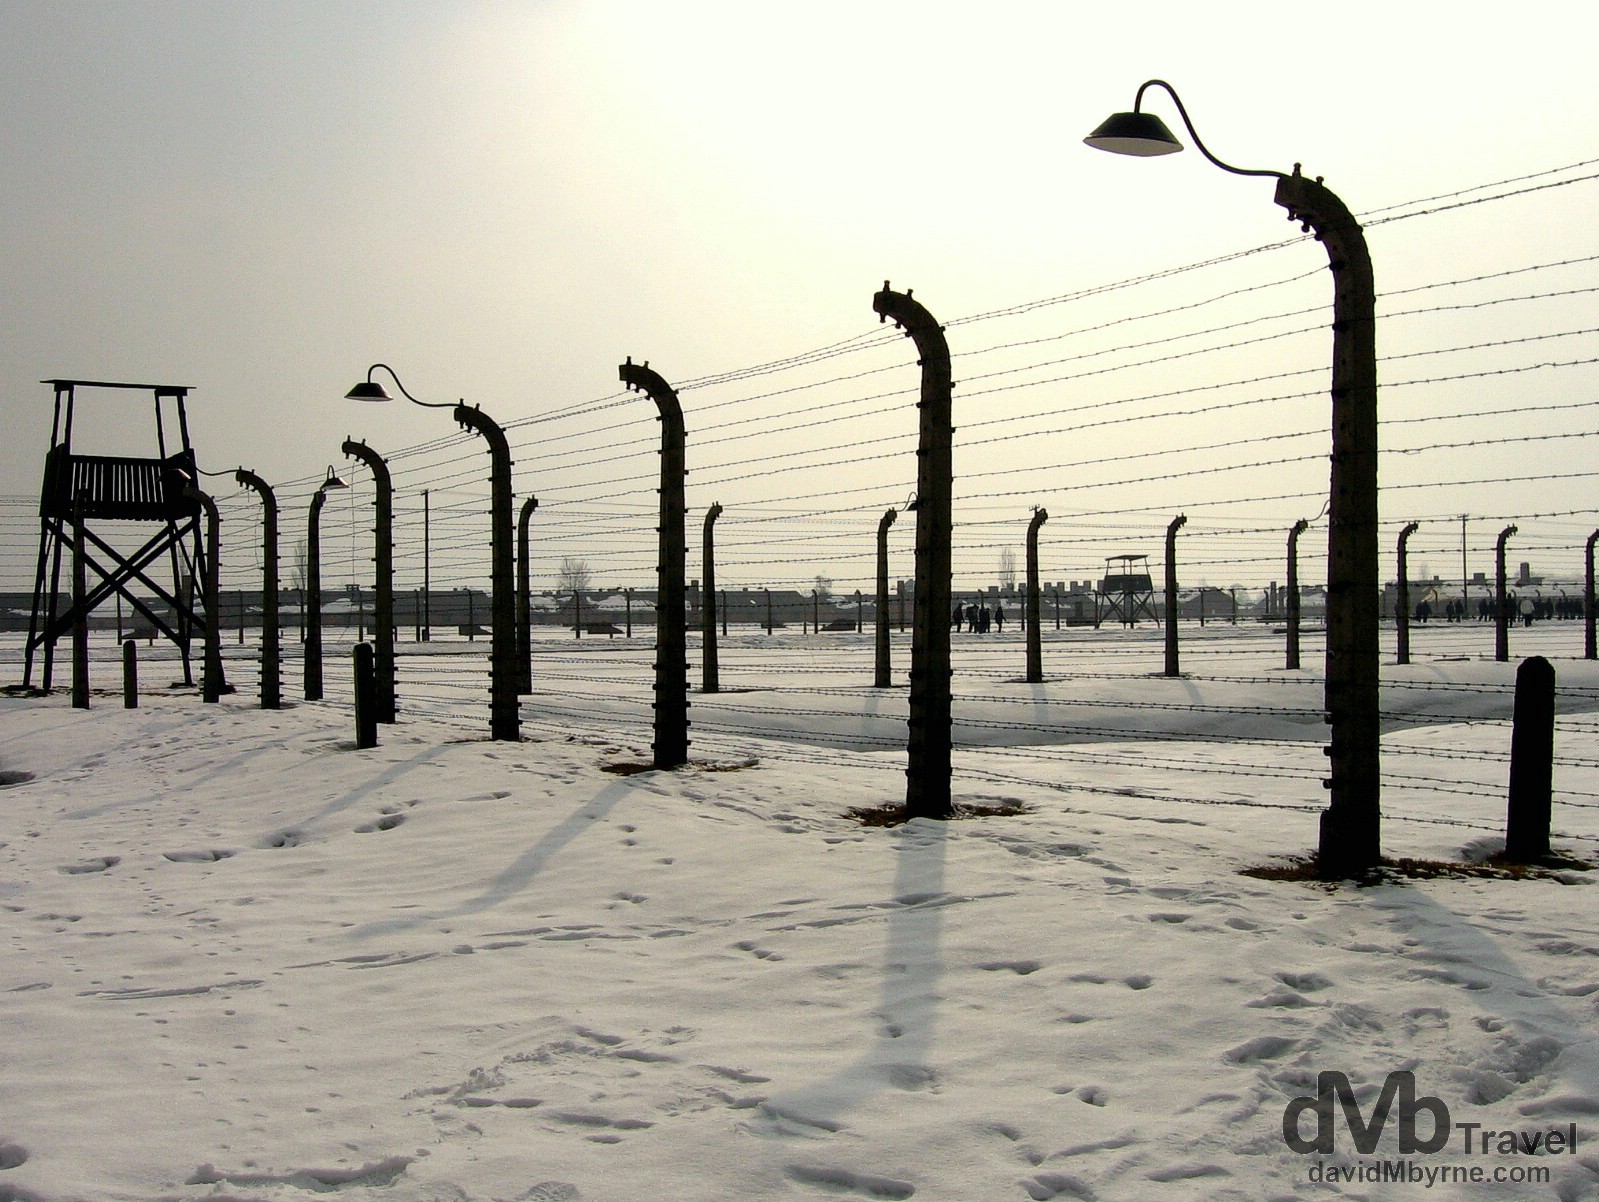 Fencing and shadows in the Birkenau Concentration Camp, Brzezinka, Poland. March 7th 2006.